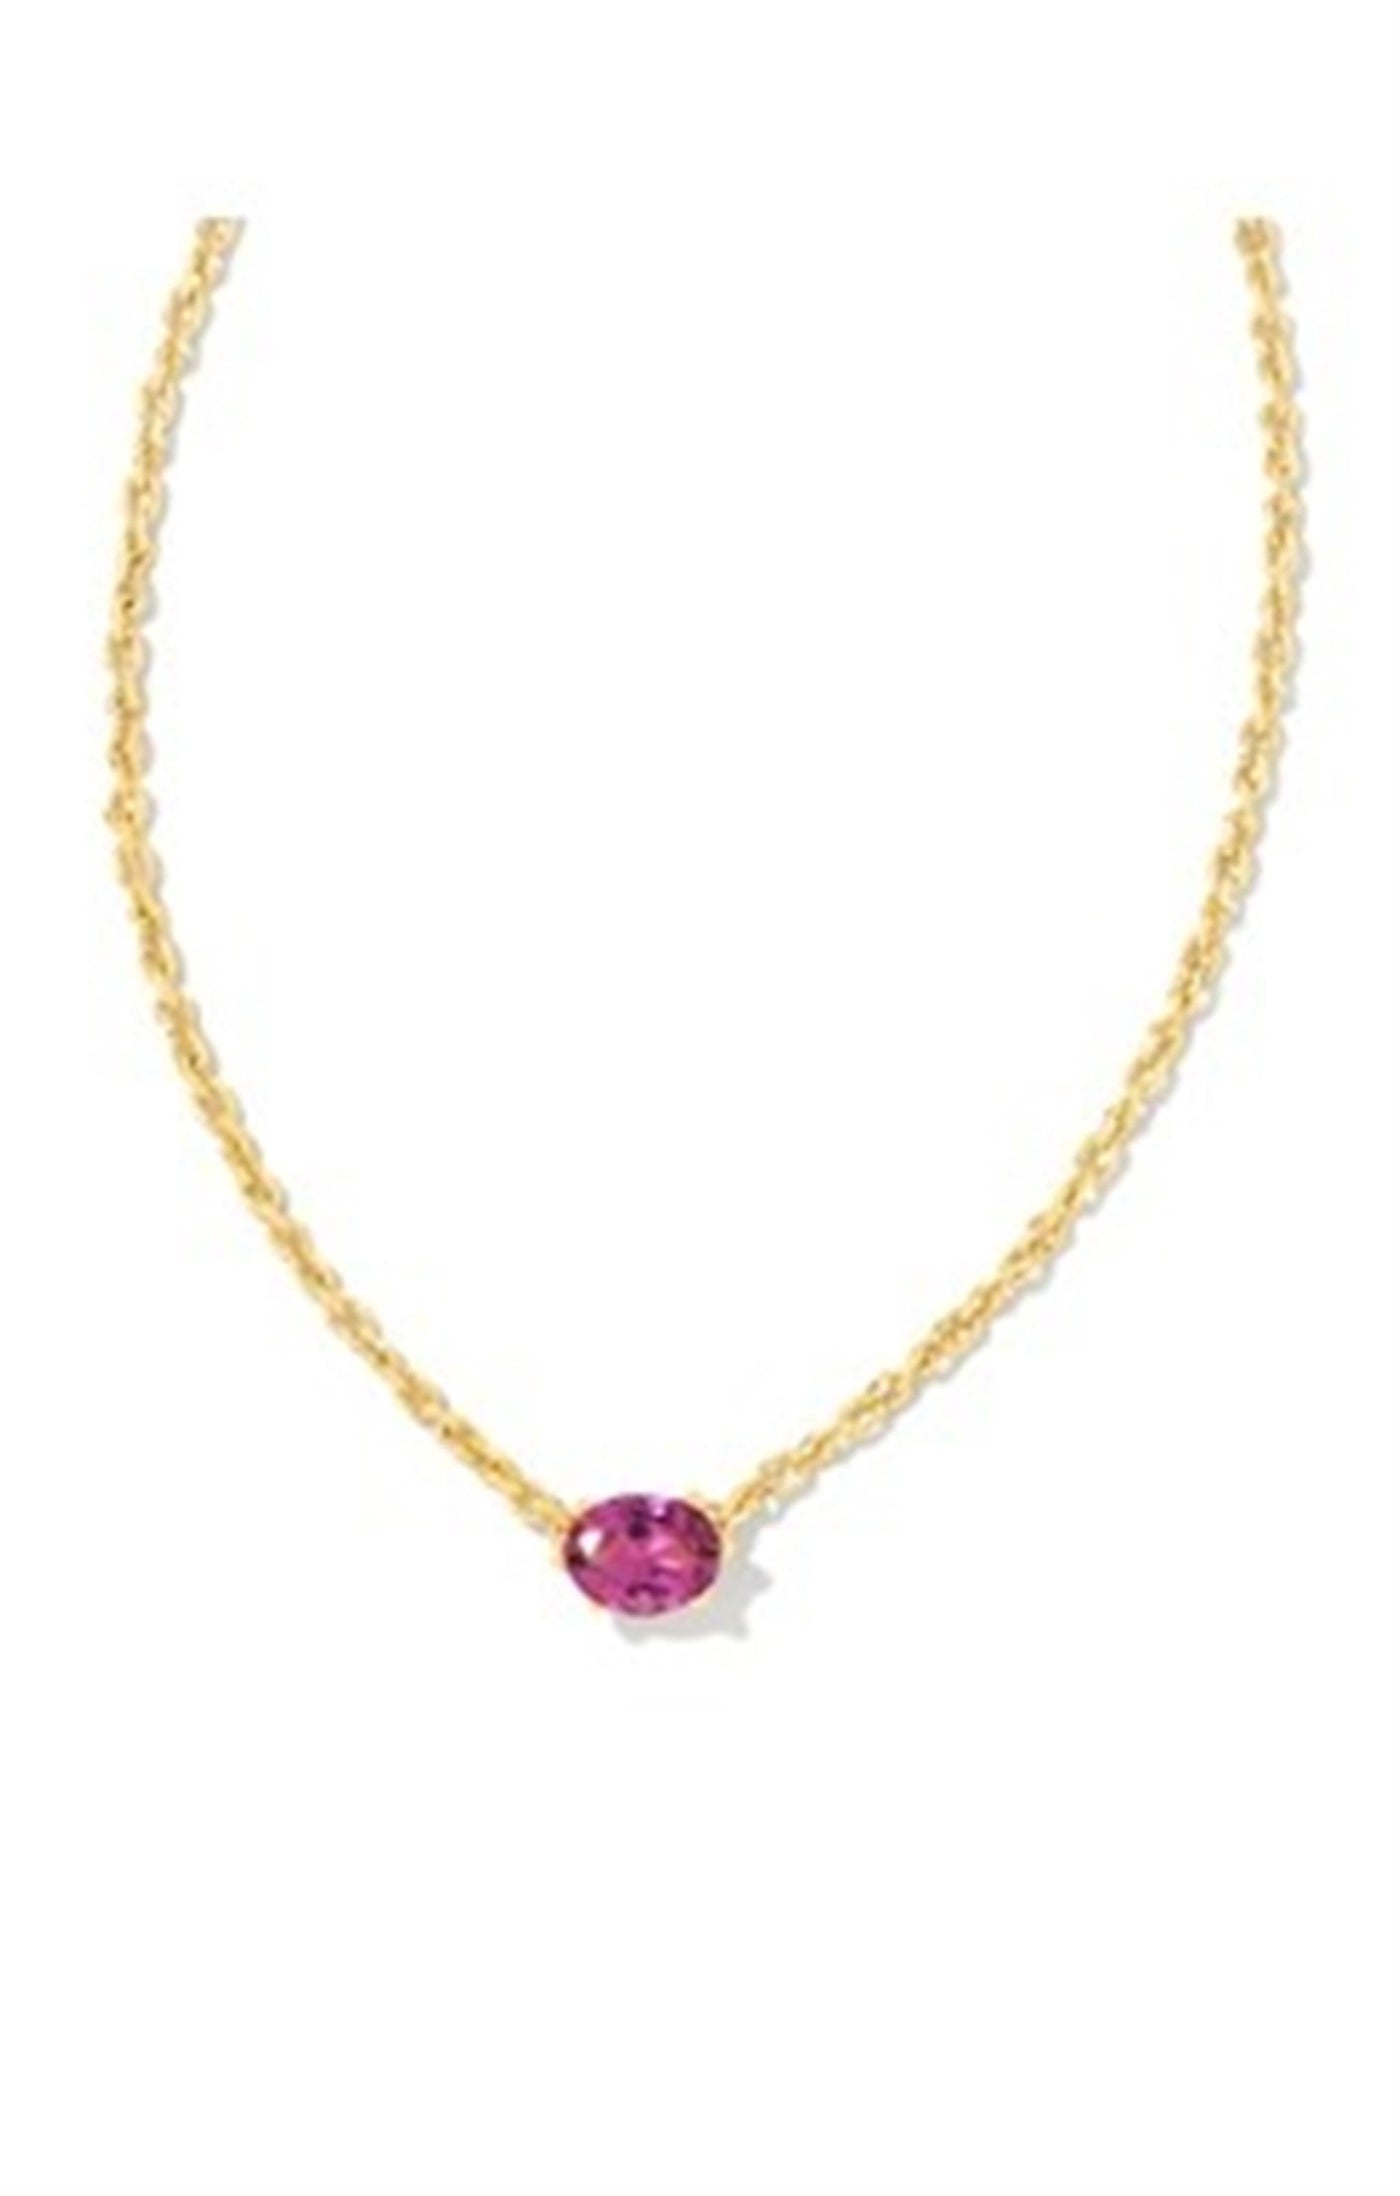 Gold Tone Necklace Featuring Purple Crystal by Kendra Scott